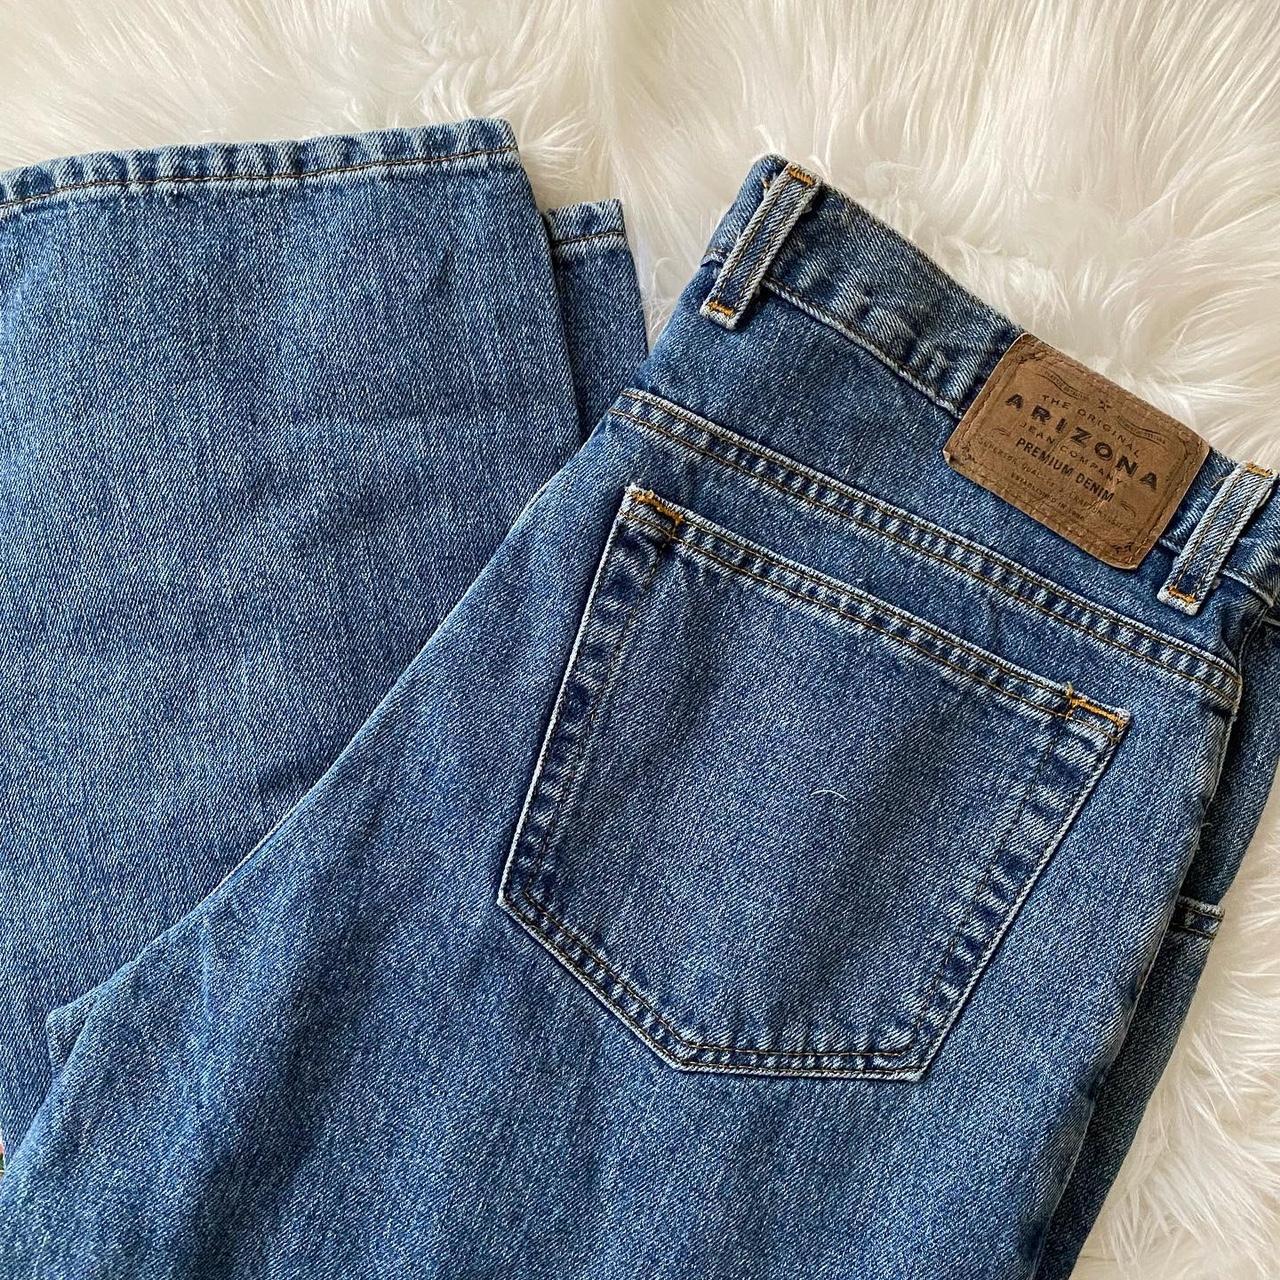 Vintage arizona straight leg jeans! From the 90s.... - Depop